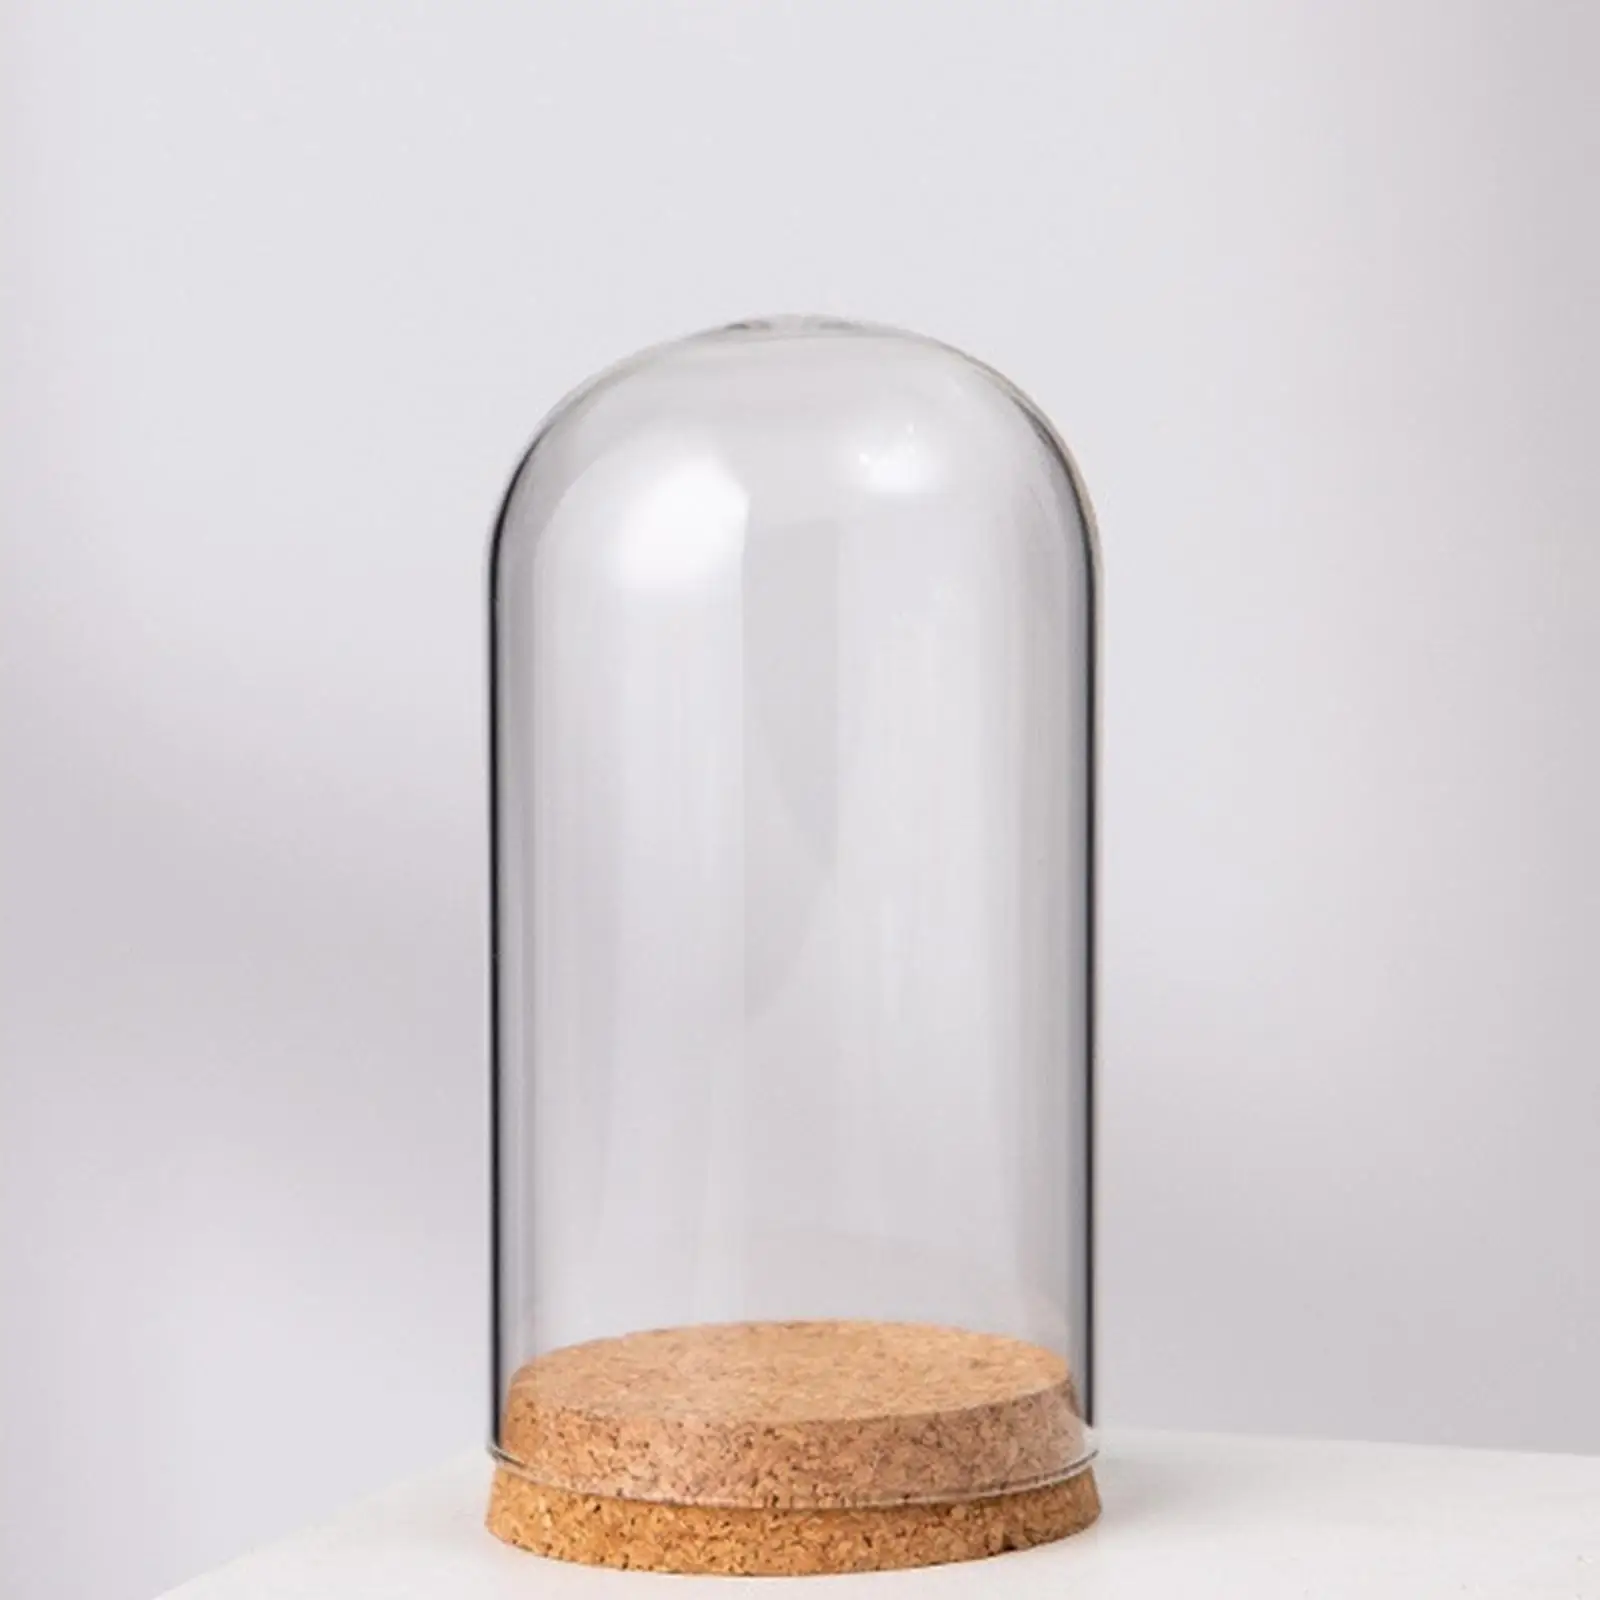 Cloche Jar with Wood Base Glass Cloche Bell Jar Display Dome for Party Decor